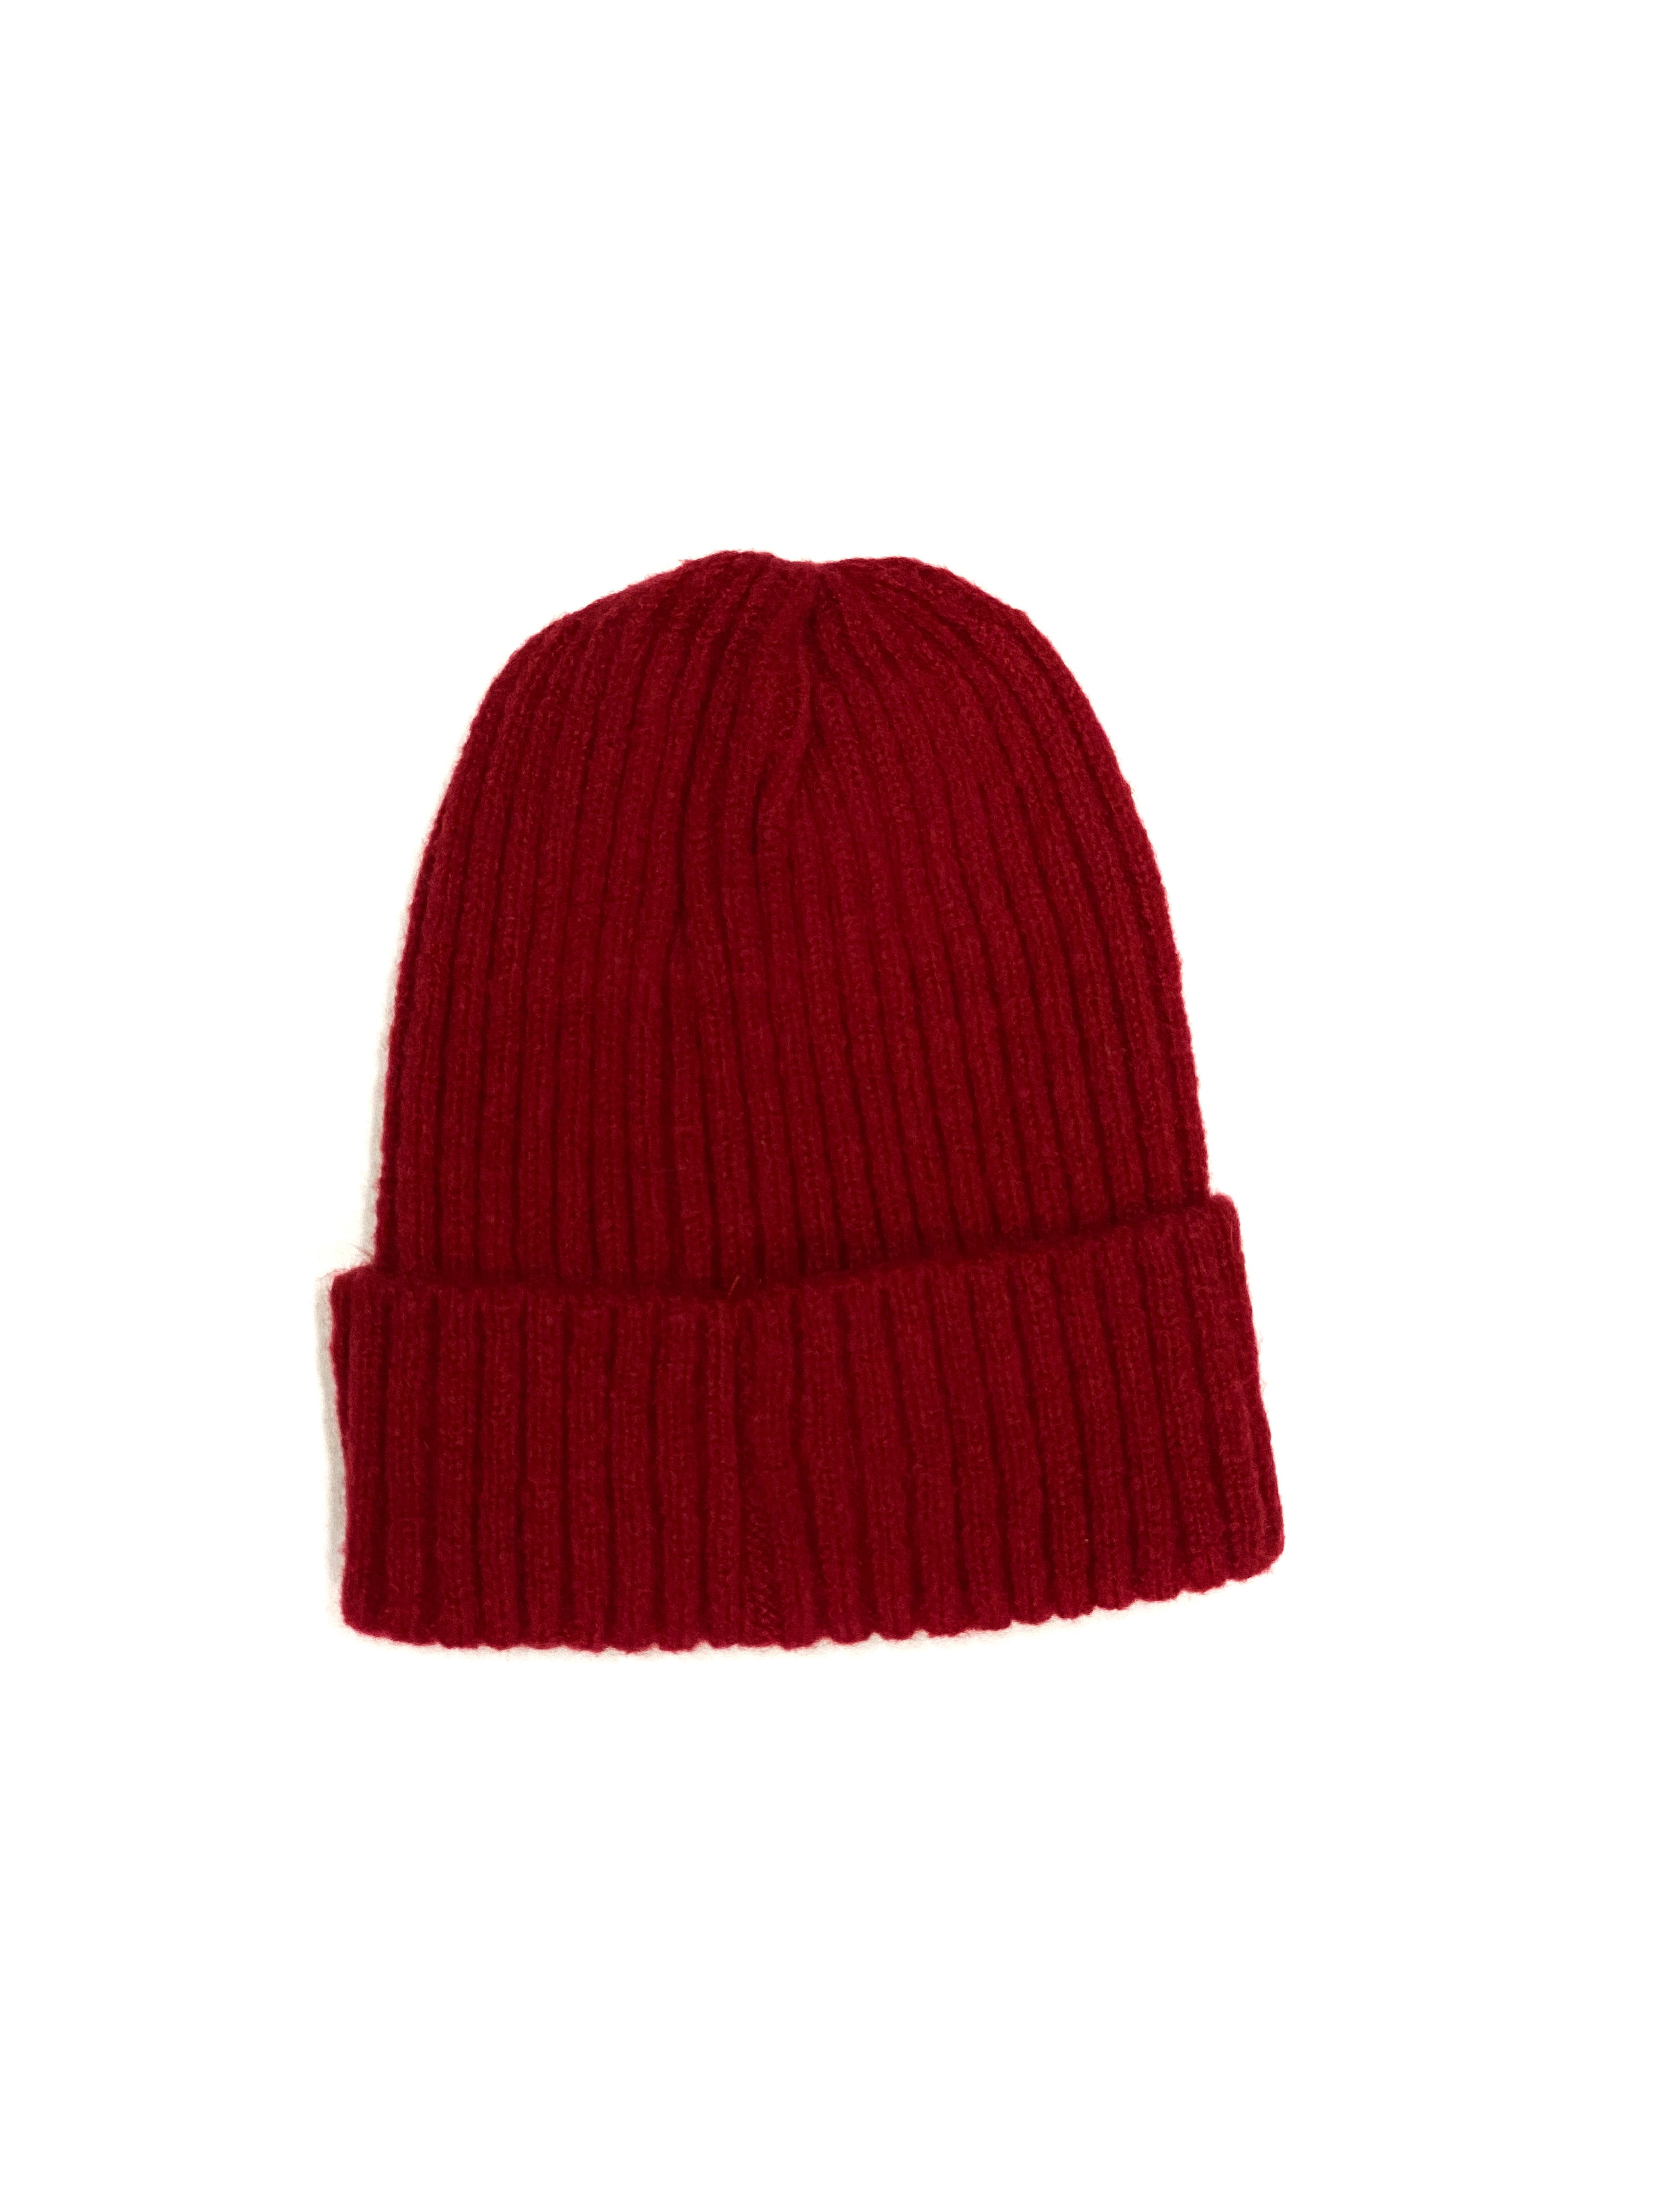 Time Changes Beanie